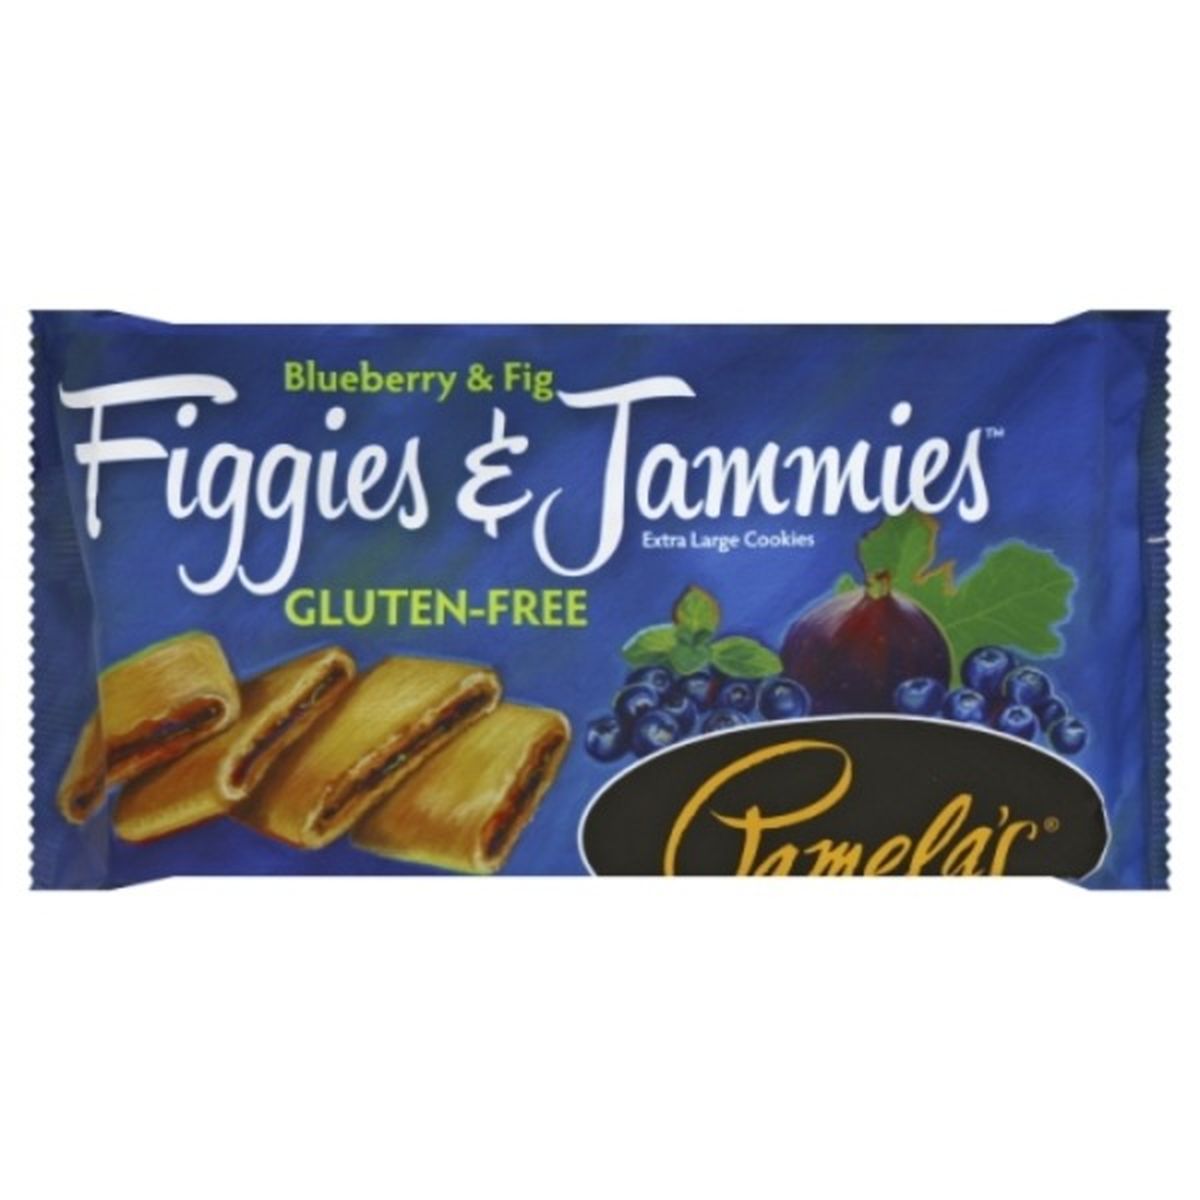 Calories in Pamela's Figgies & Jammies Cookies, Blueberry & Fig, Extra Large